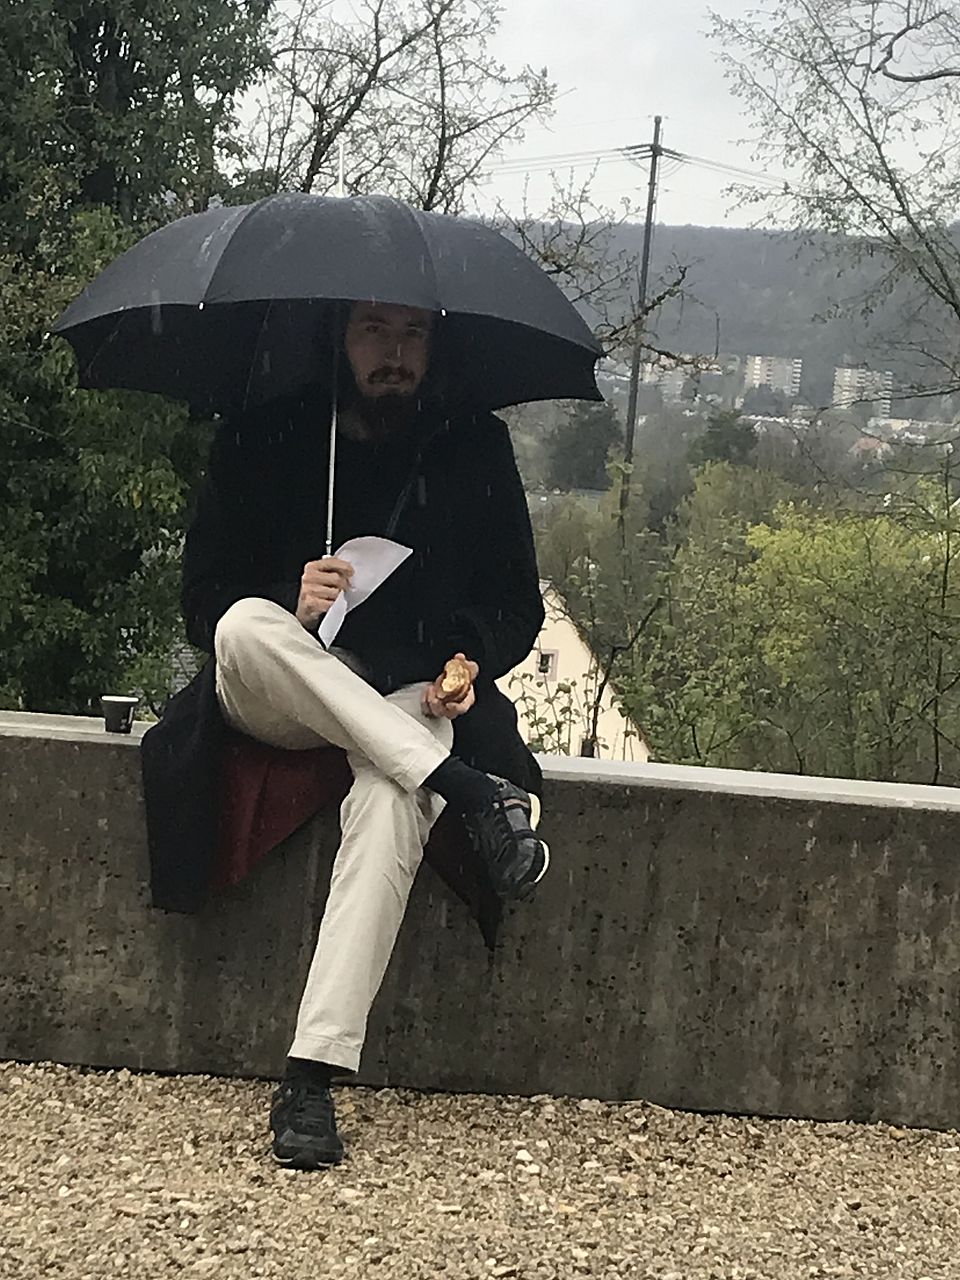 Leo sits in the rain with umbrella, break between lectures on study day